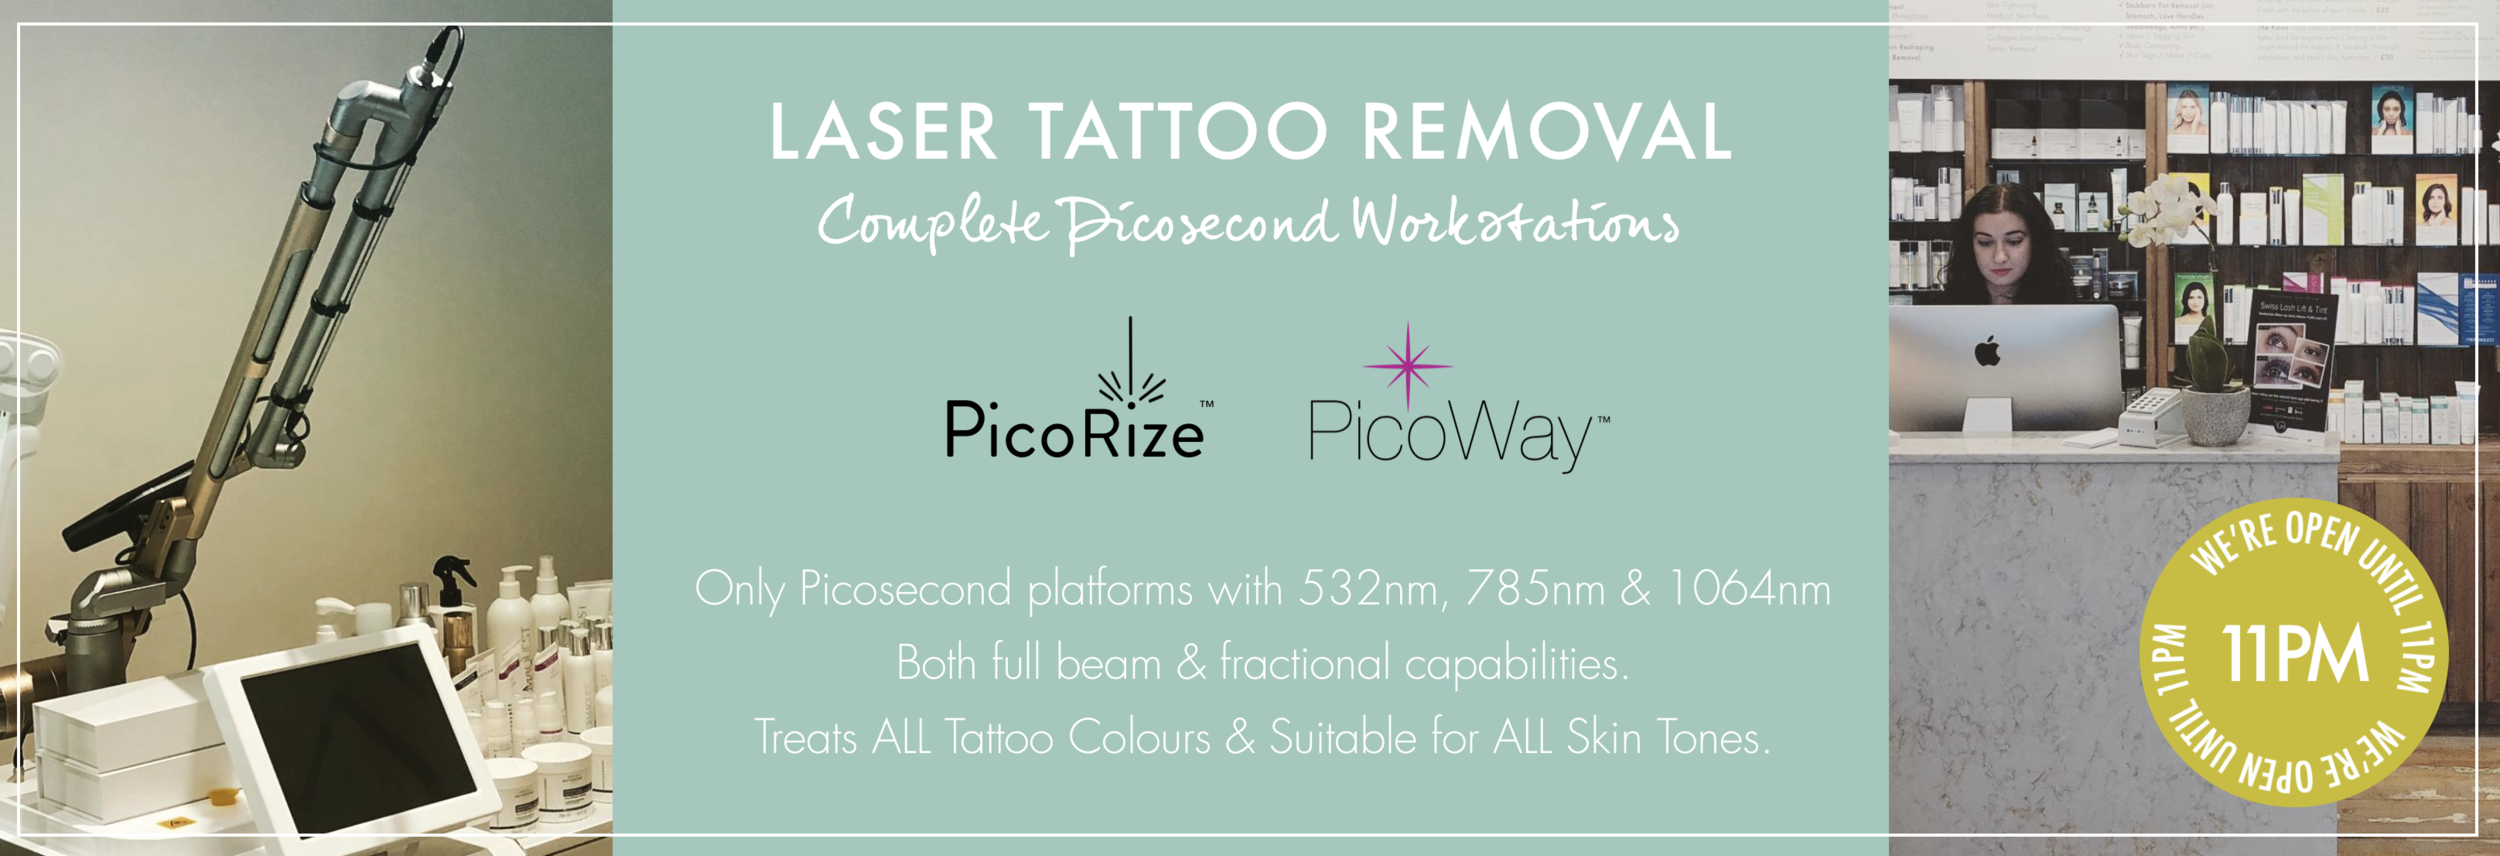 PicoSure Tattoo Removal  Graystone Aesthetic Center  Hickory 